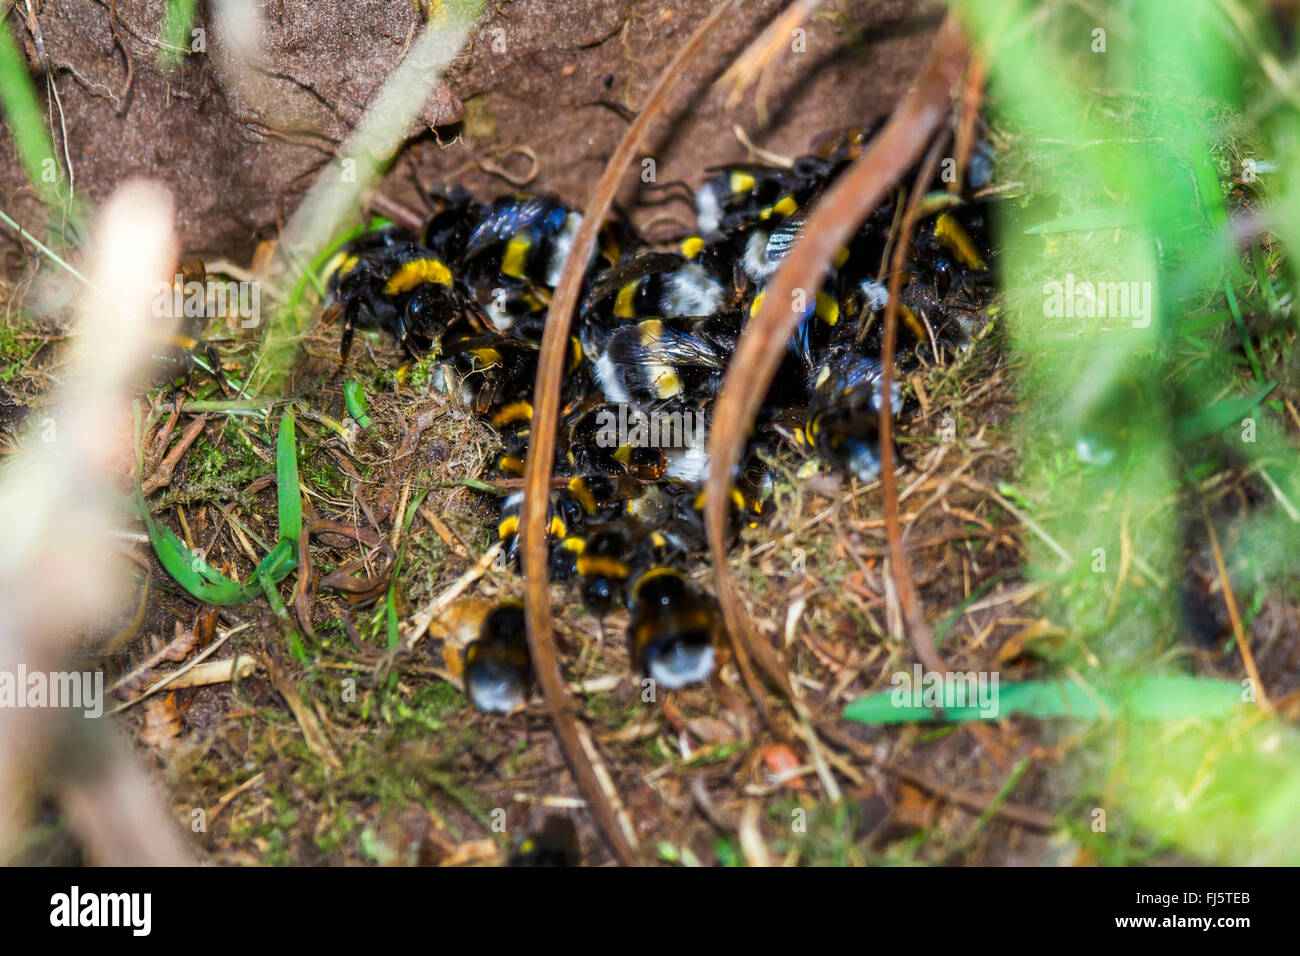 buff-tailed bumble bee (Bombus terrestris), destroyed nest of buff-tailed bumble bees, Germany, Mecklenburg-Western Pomerania Stock Photo